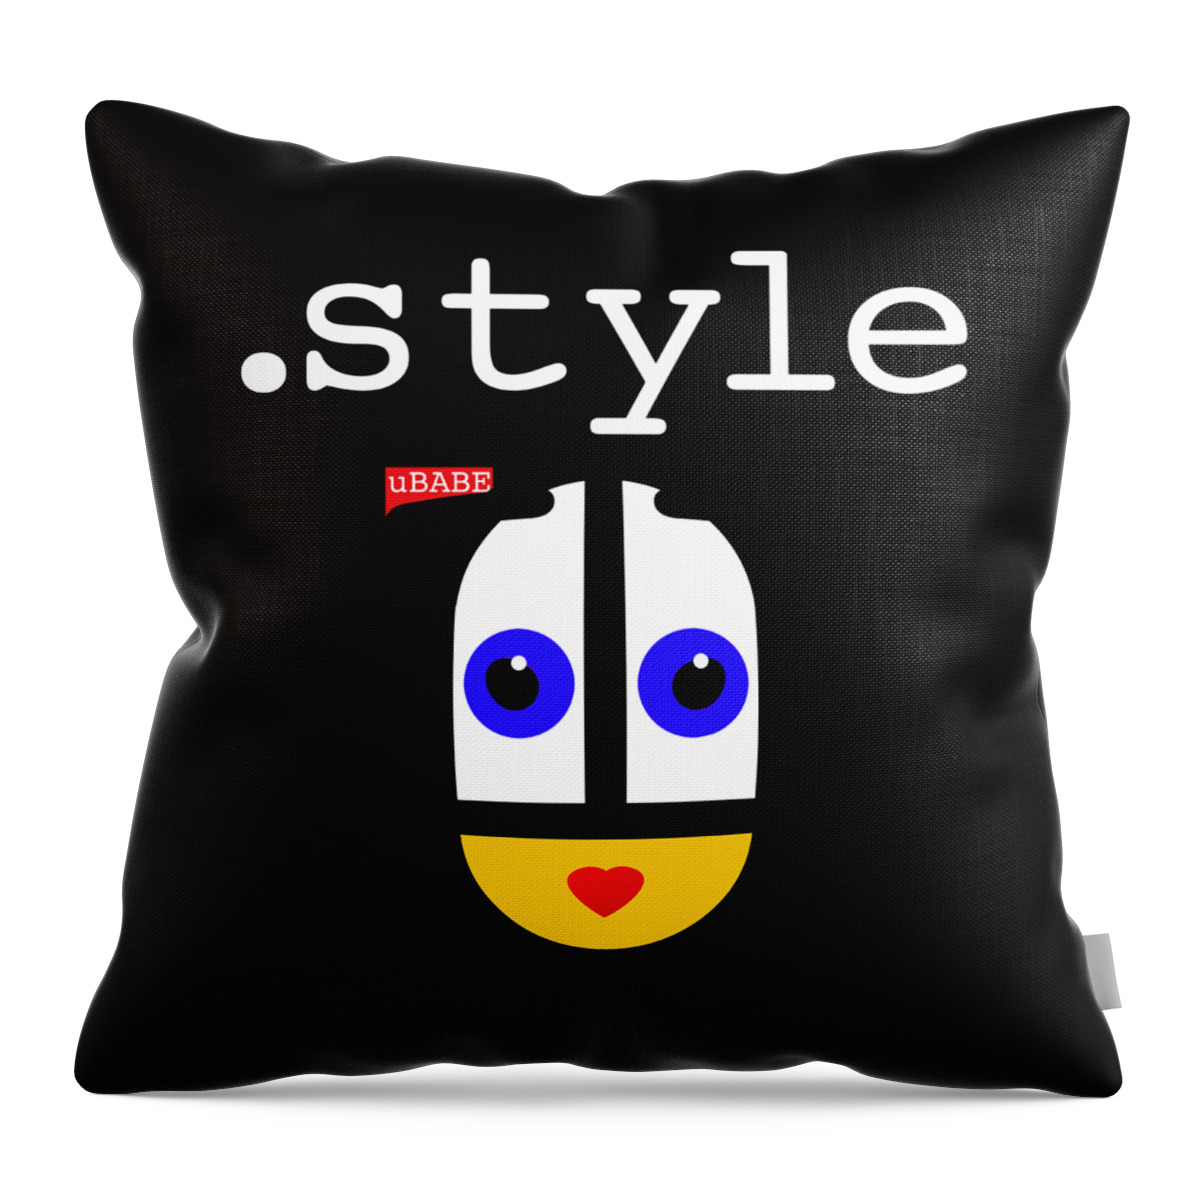 Blackstyle Url Throw Pillow featuring the digital art Black Style Ubabe by Ubabe Style